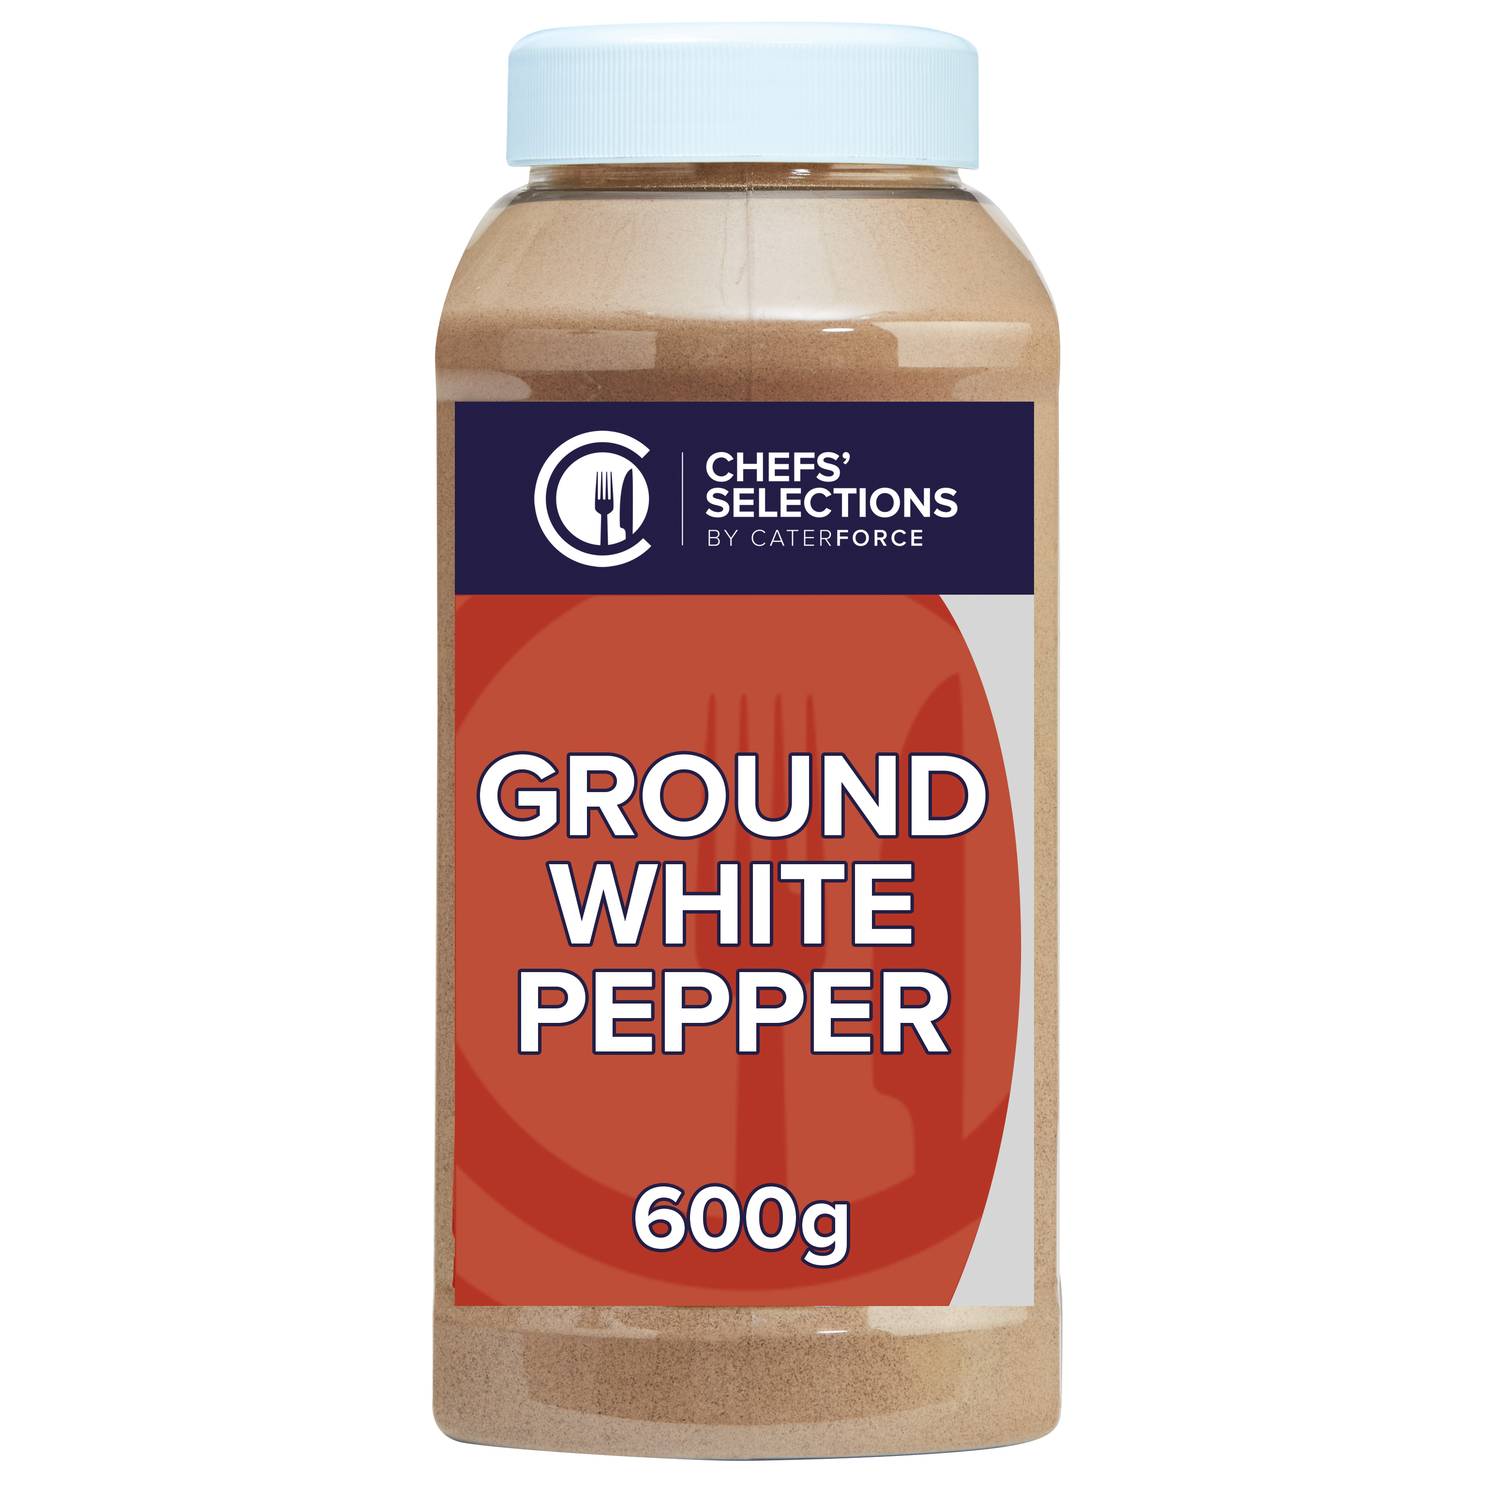 Chefs’ Selections Ground White Pepper (6 x 600g)